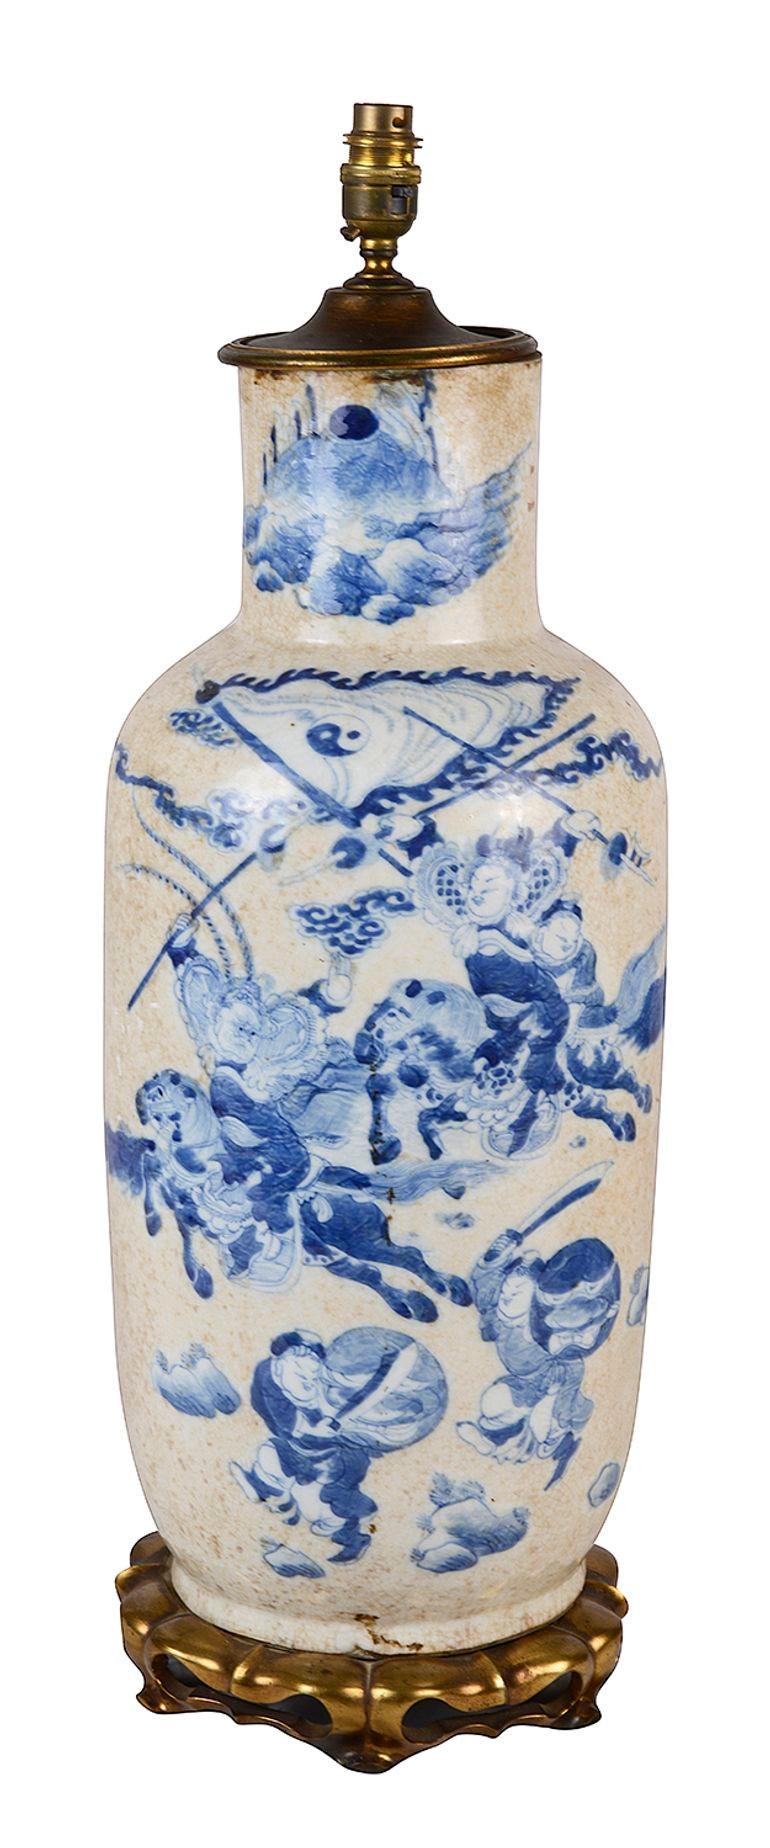 An impressive, good quality late 19th Century Chinese export blue and white crackleware vase / lamp. Having wonderful hand painted scenes of soldiers on horseback and running holding shields and swords.
Mounted on a gilded ormolu pierced stand in